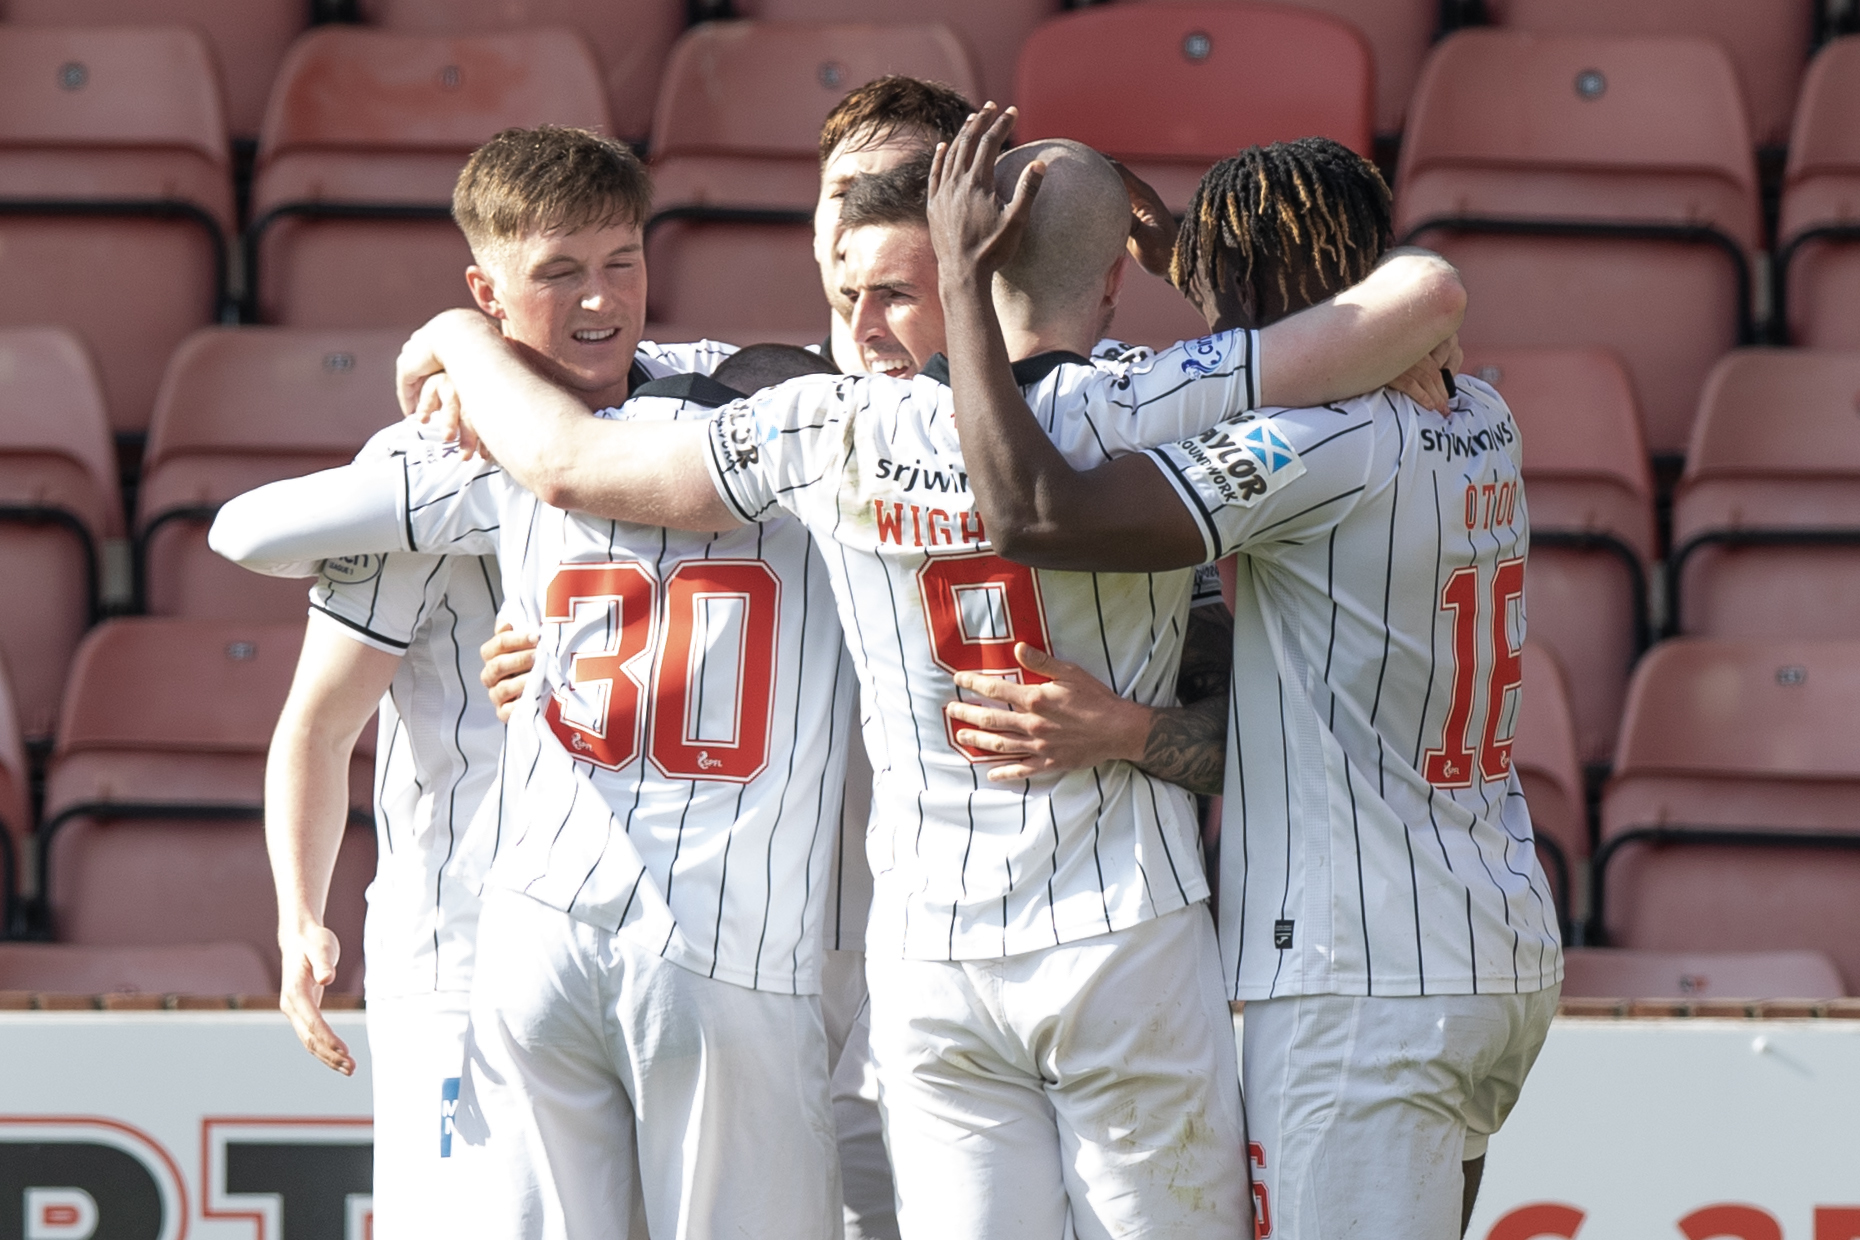 Dunfermline: Dave Mackay on records and game time before Airdrie clash